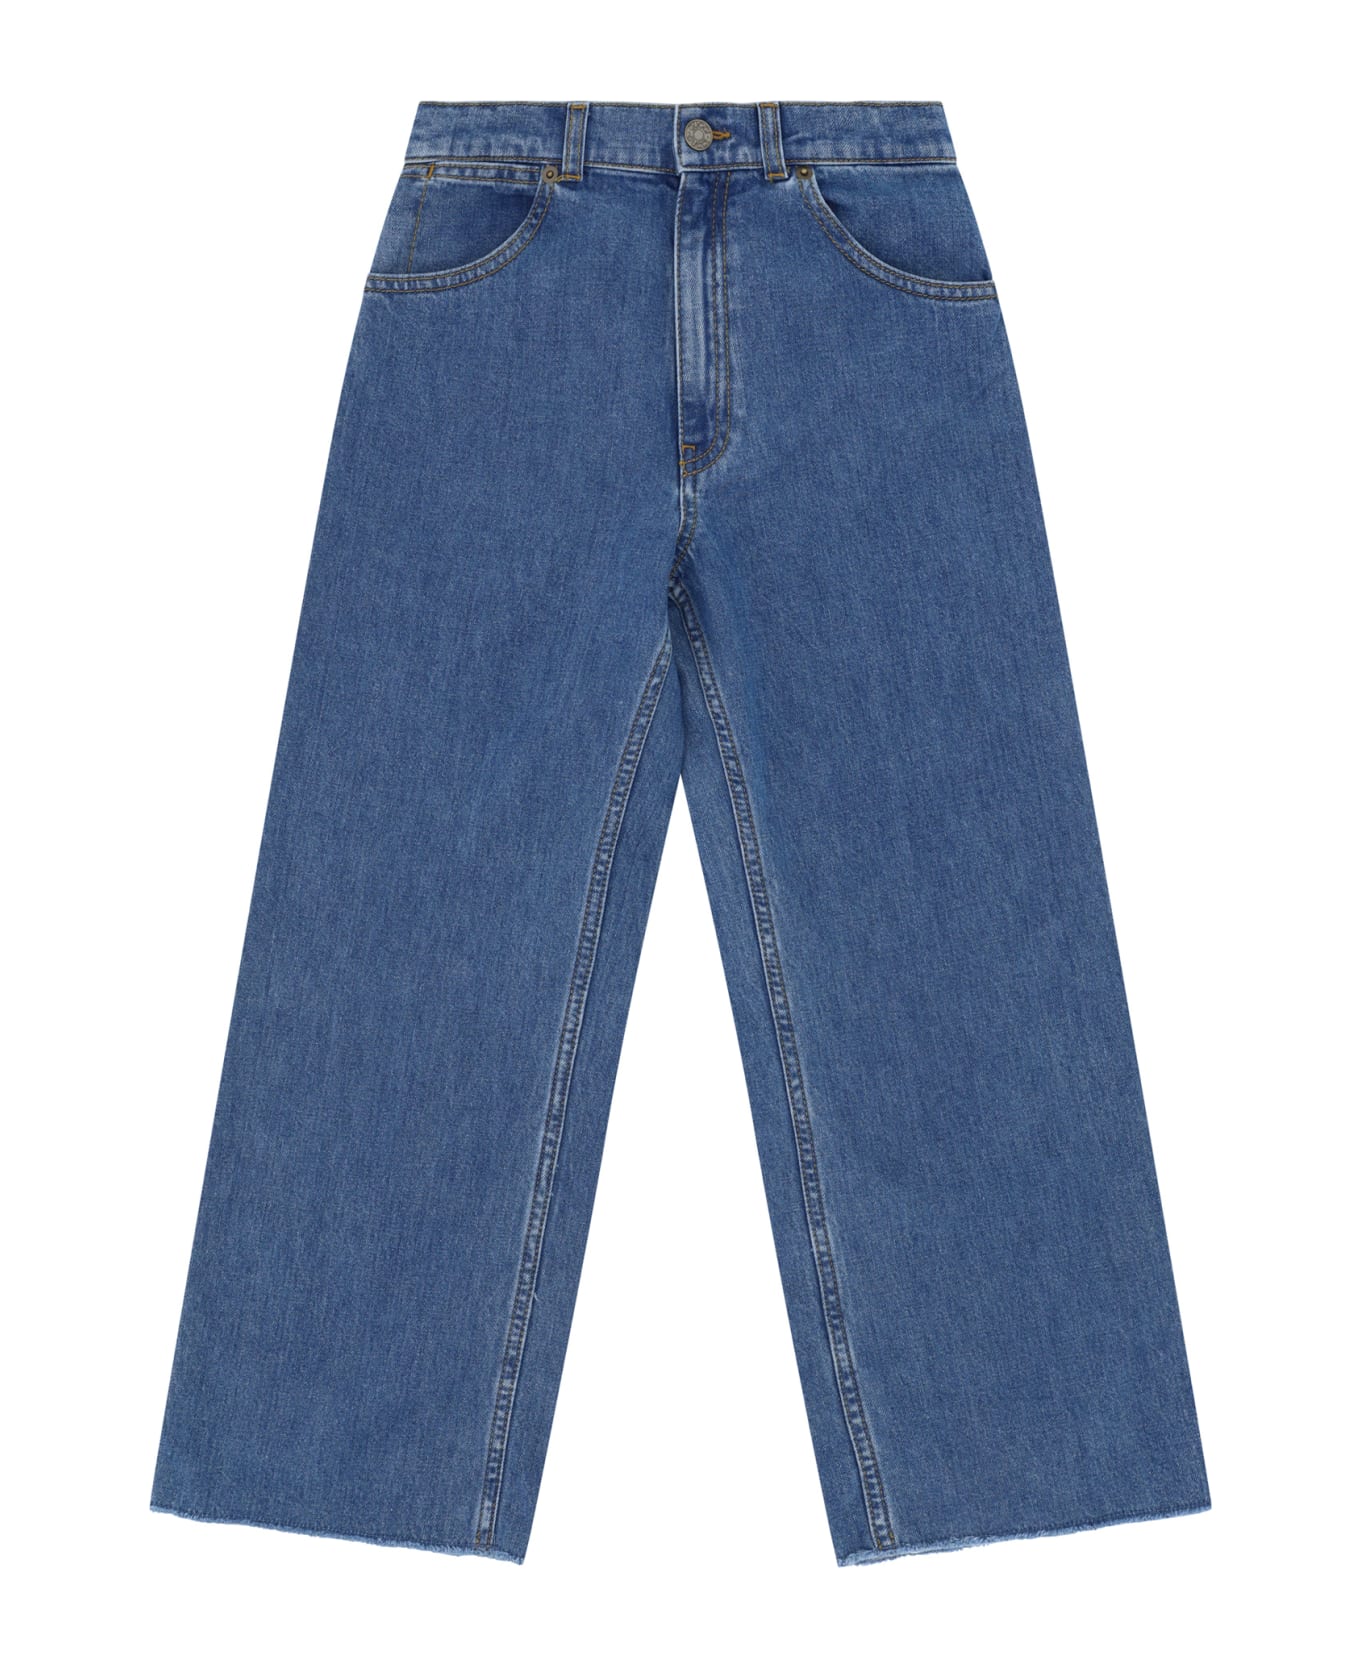 Gucci Jeans For Boy - Blue/mix